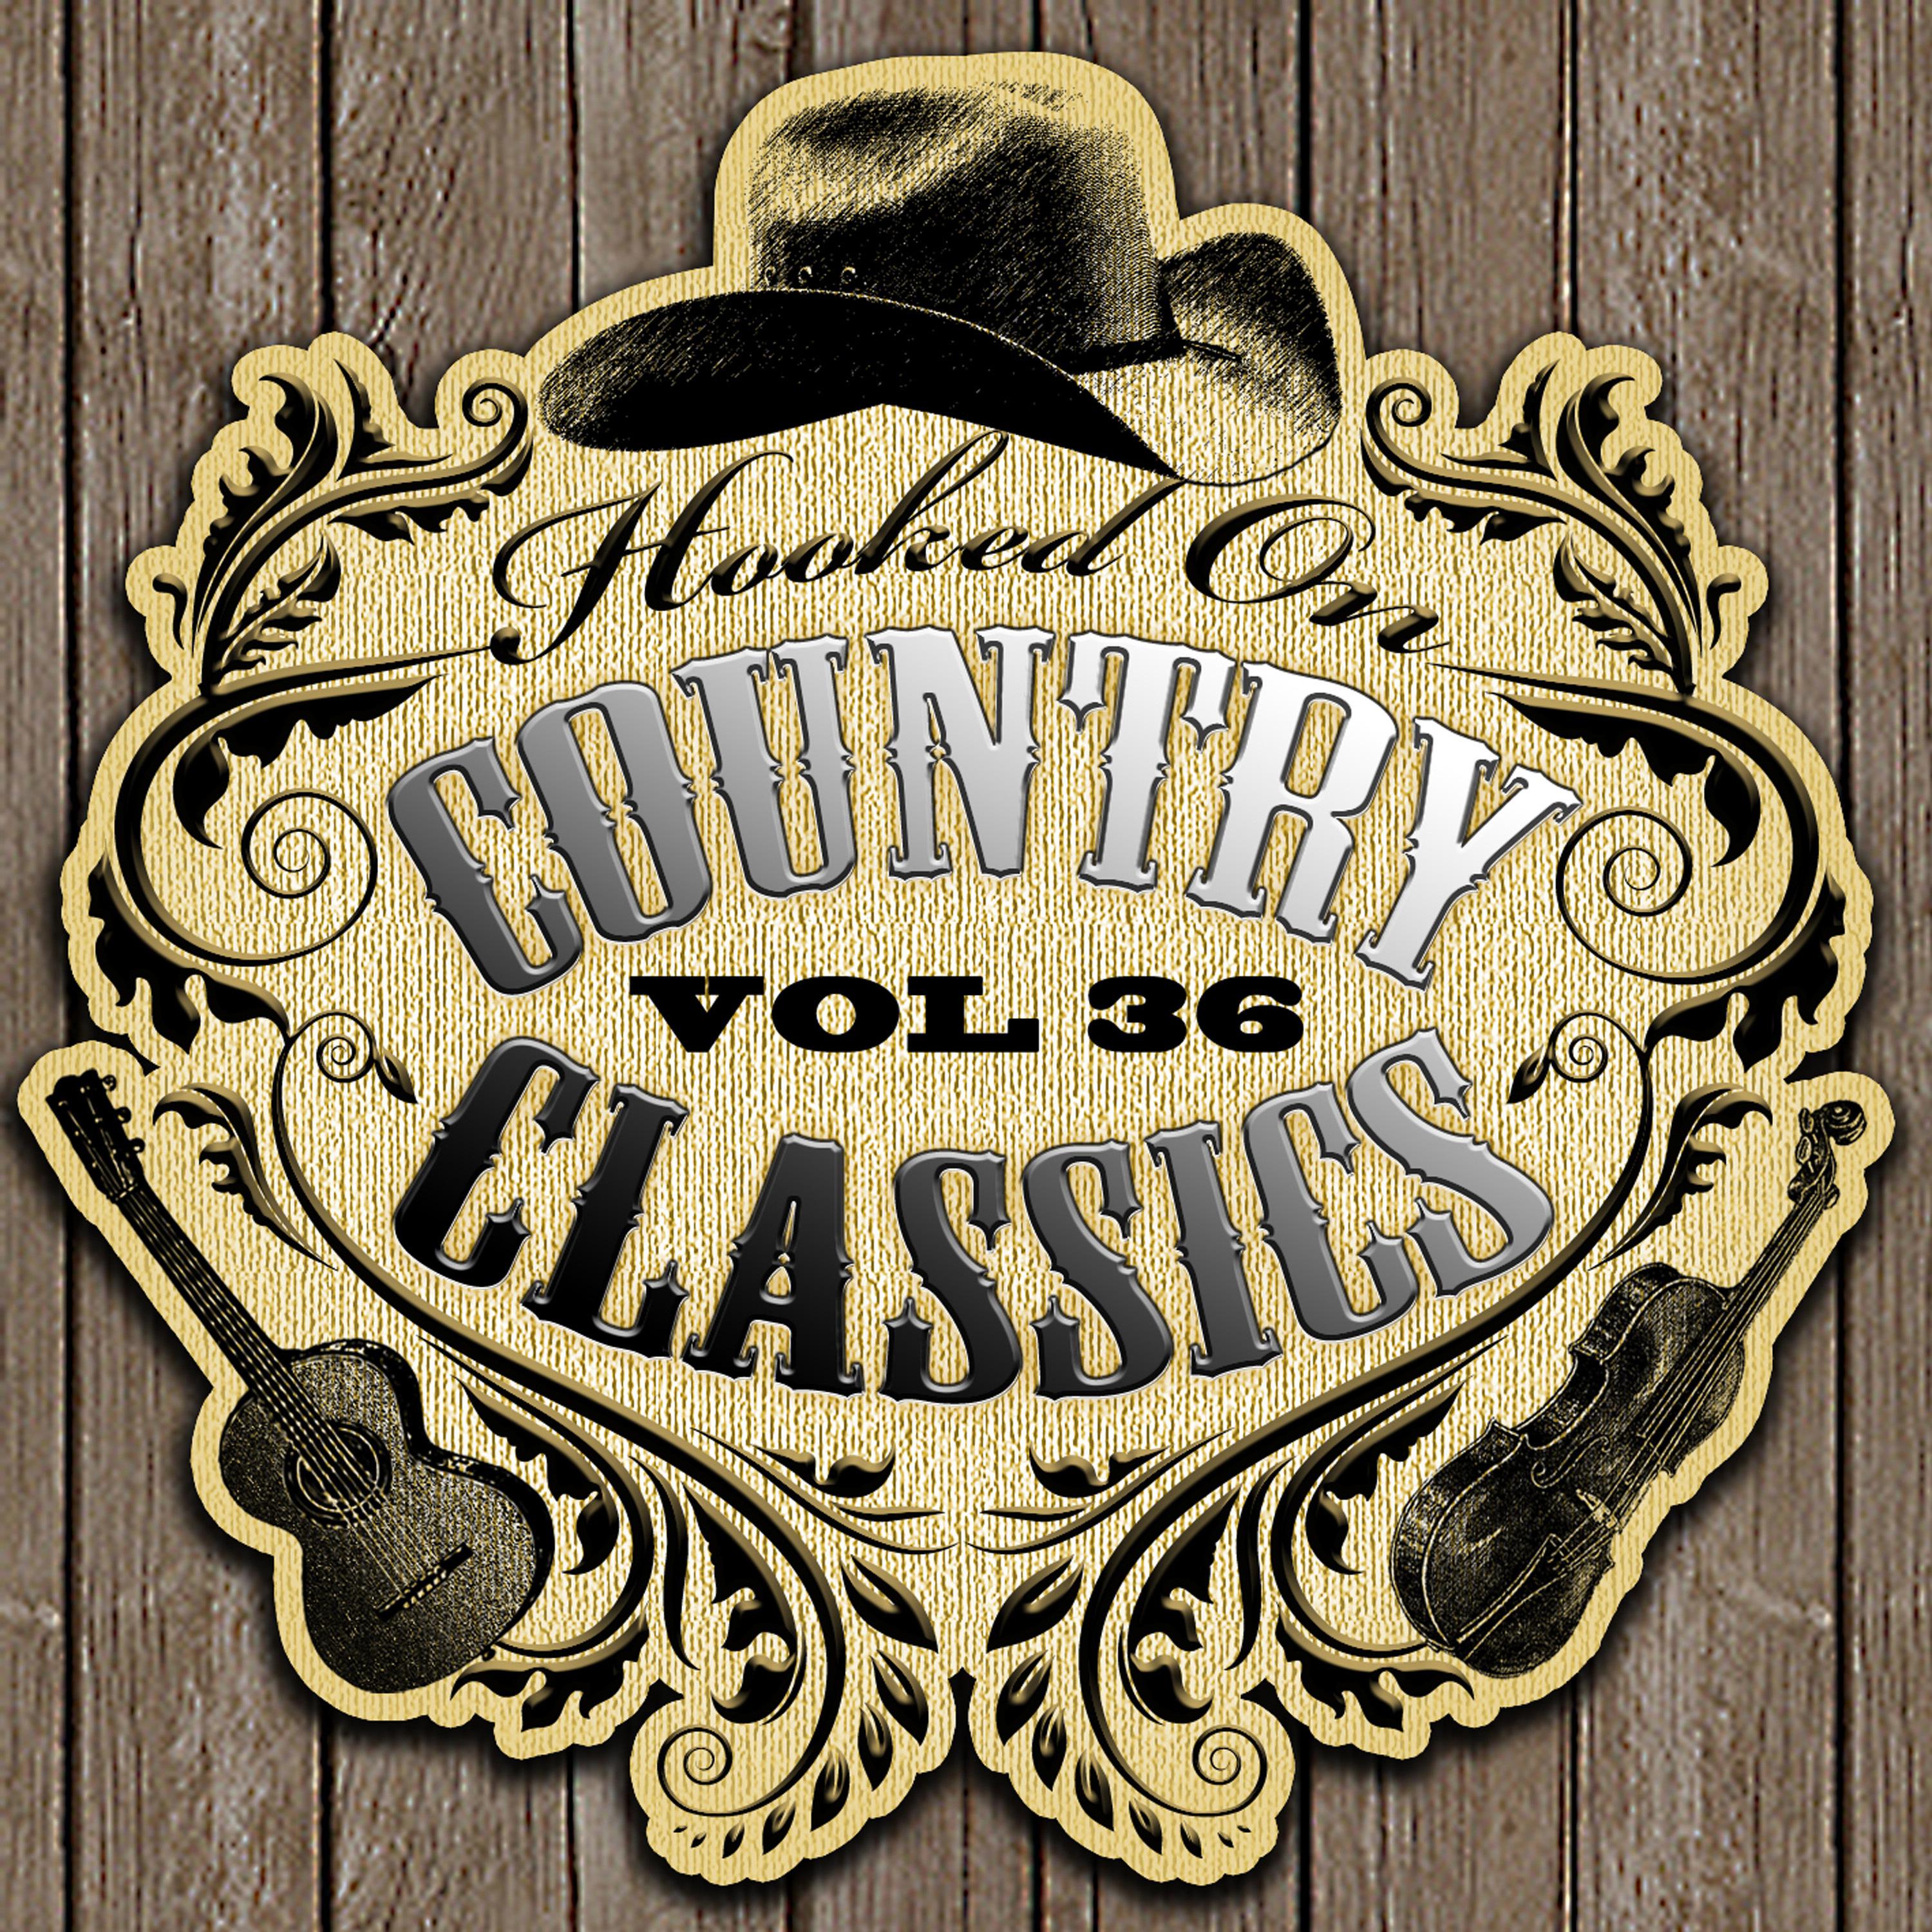 Hooked On Country Classics, Vol. 36